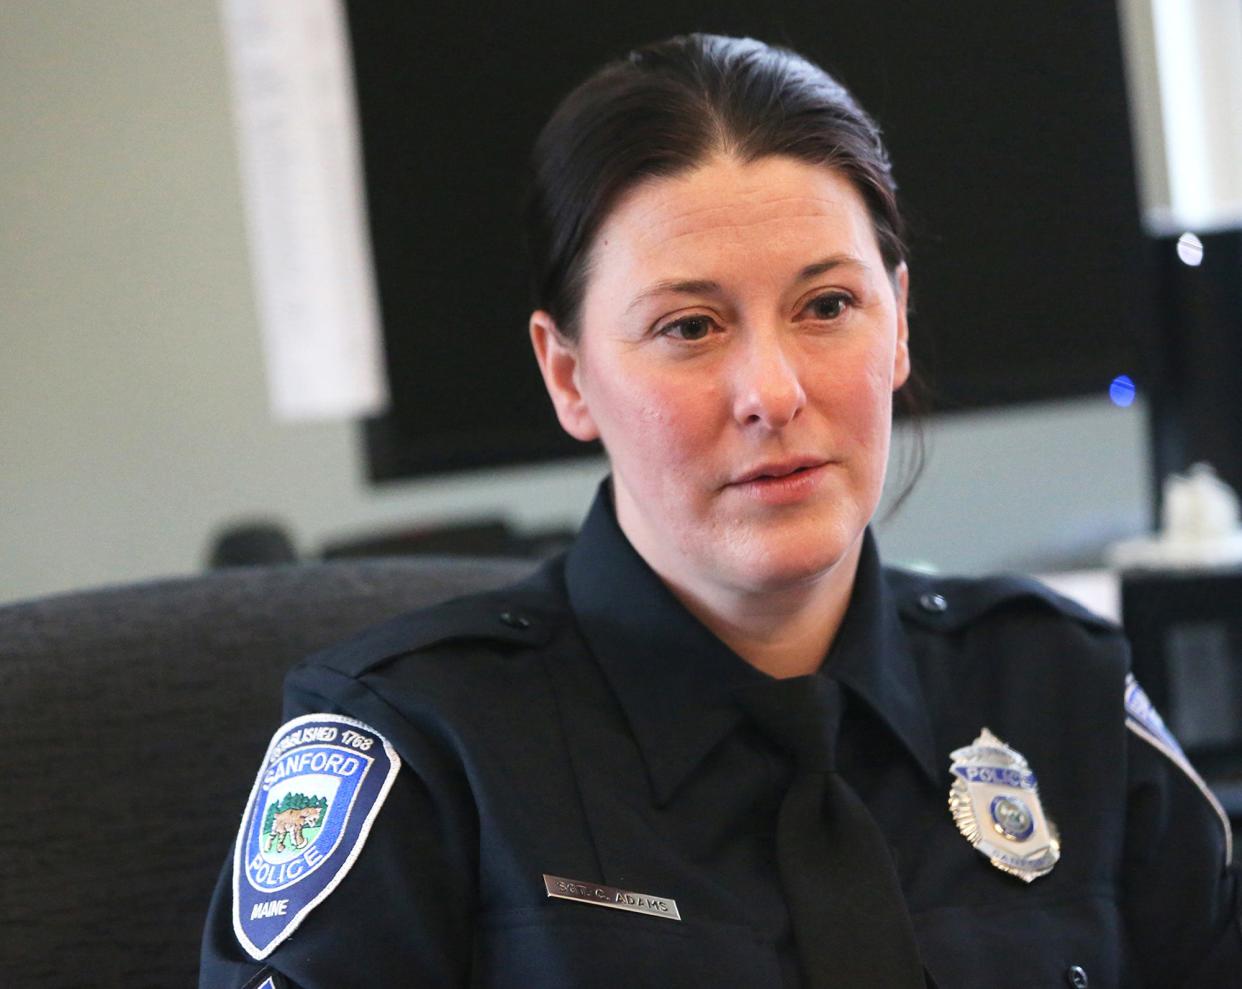 Sanford police Sgt. Colleen Adams has been chosen as the USA Today Network's 2023 Maine Woman of the Year.